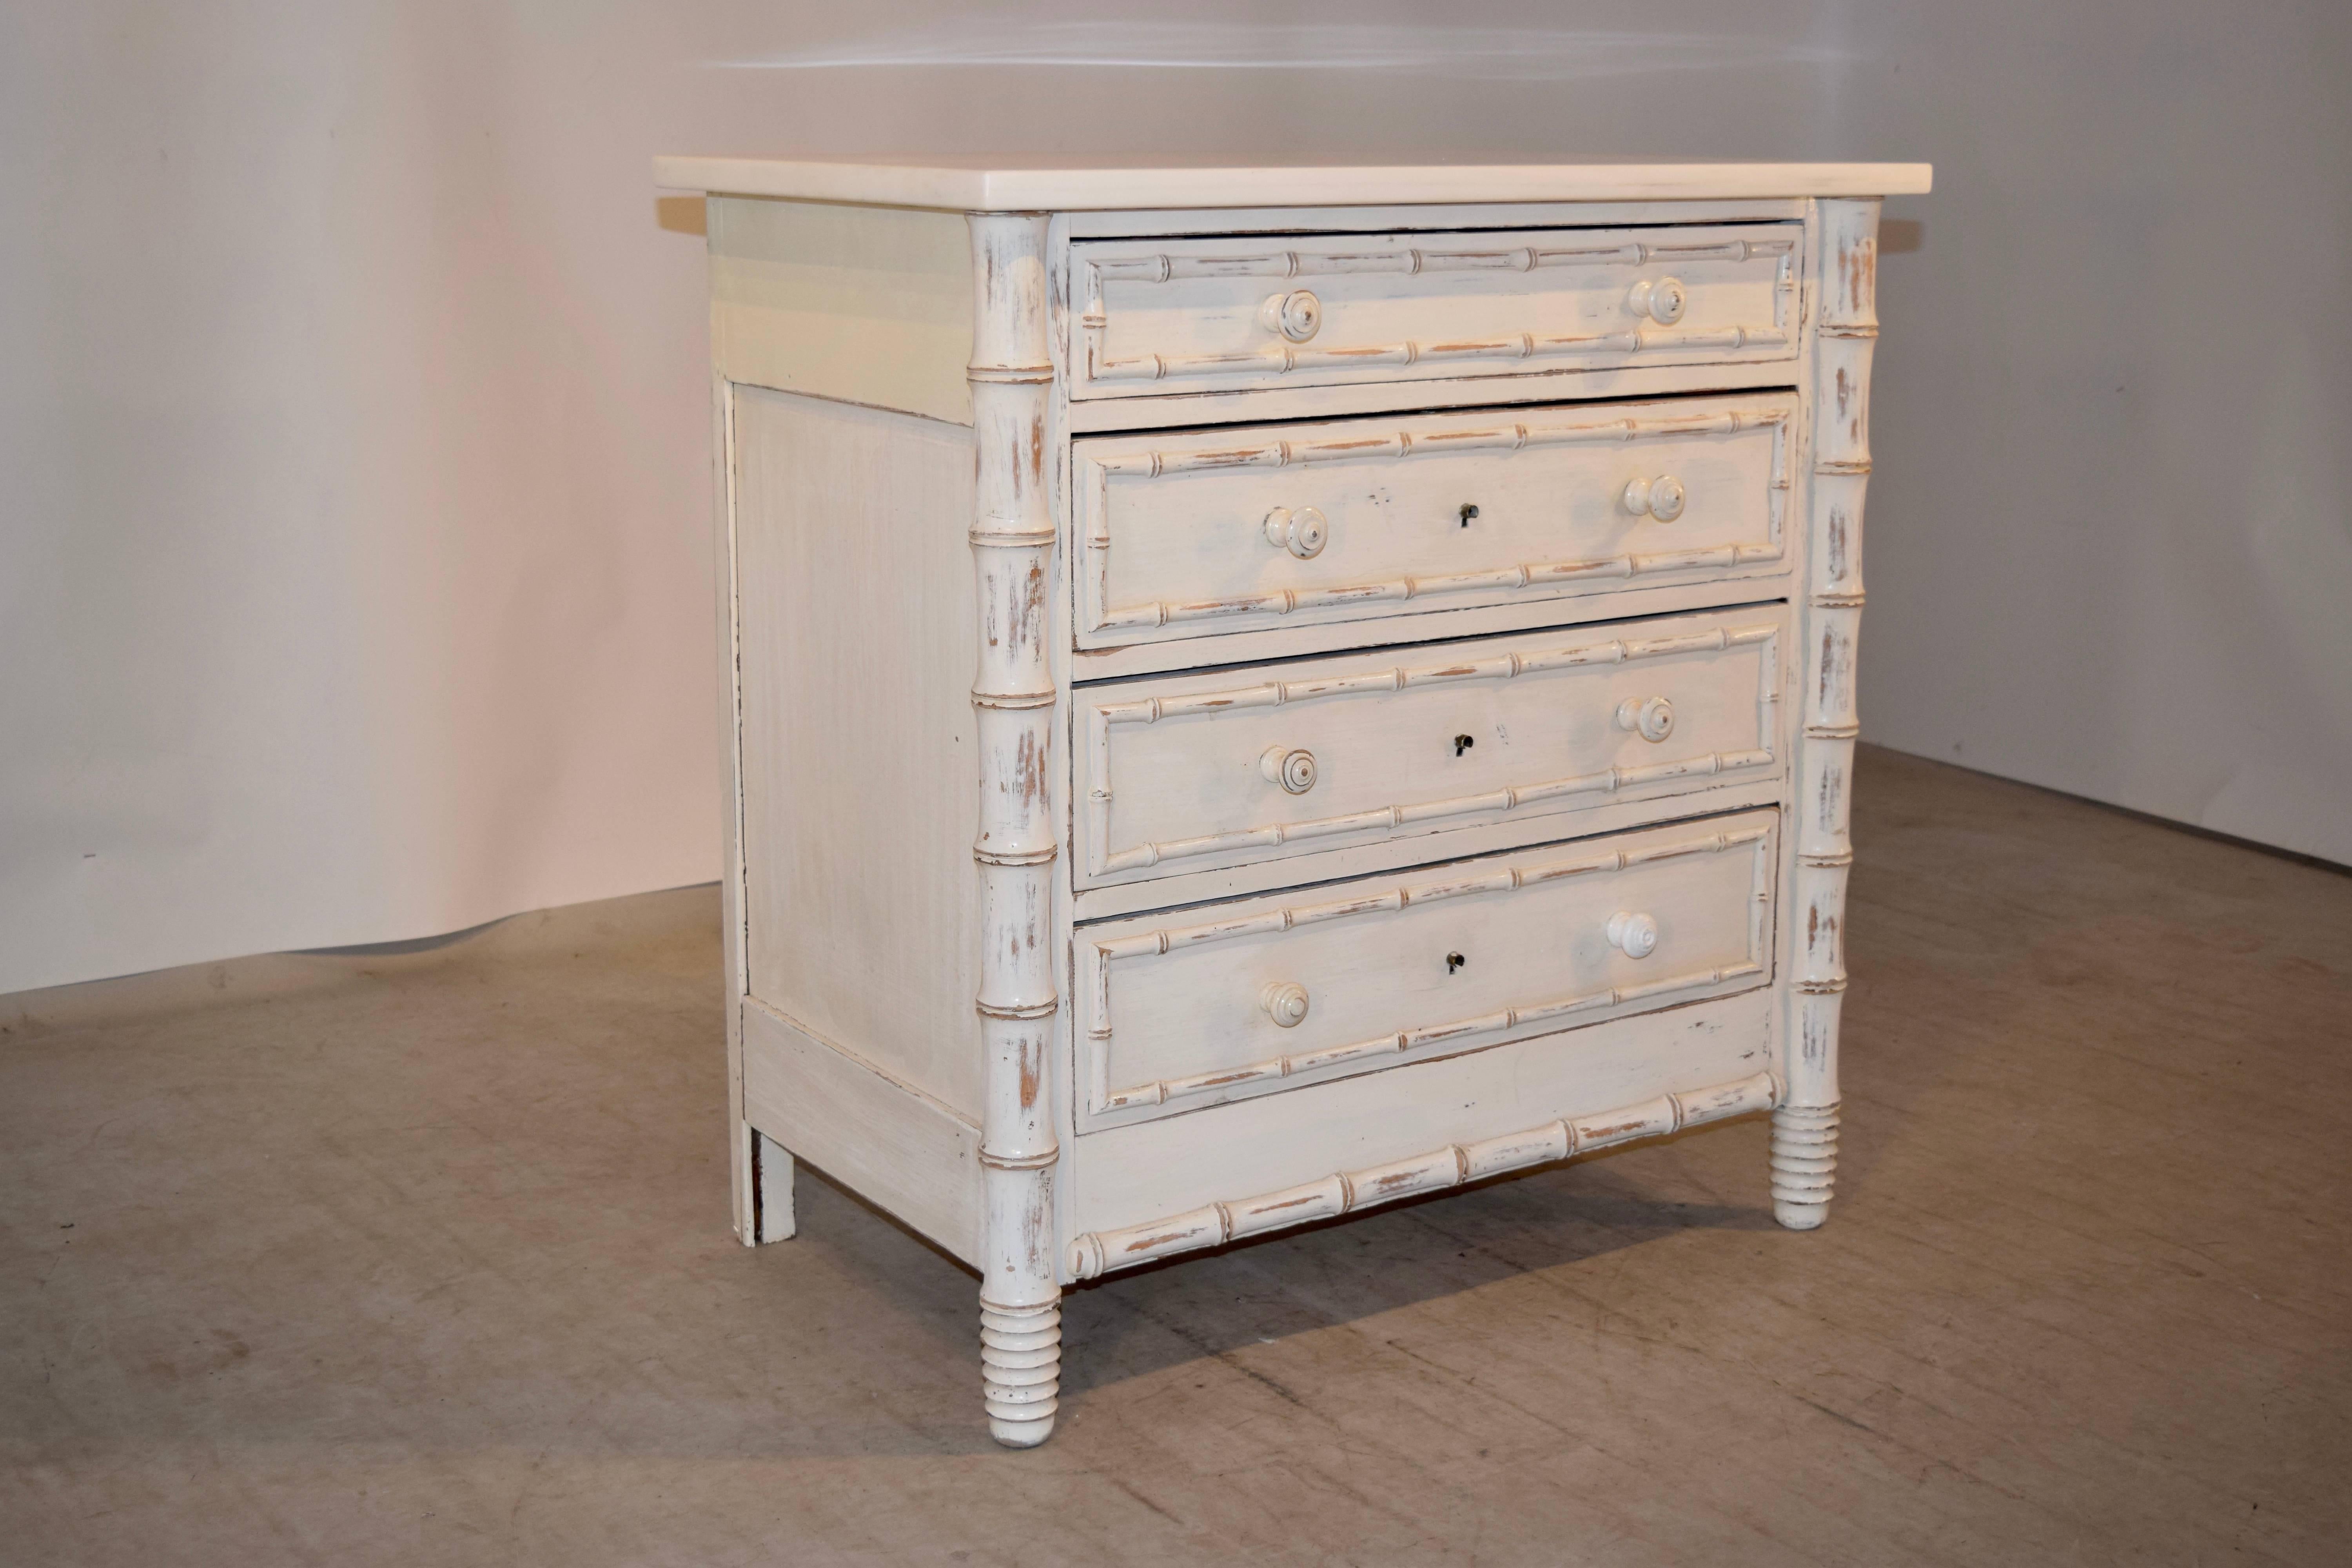 19th century small French chest with a new marble top, following down to a small chest with four drawers, all banded in faux bamboo trim and panelled sides, supported on hand-turned feet.